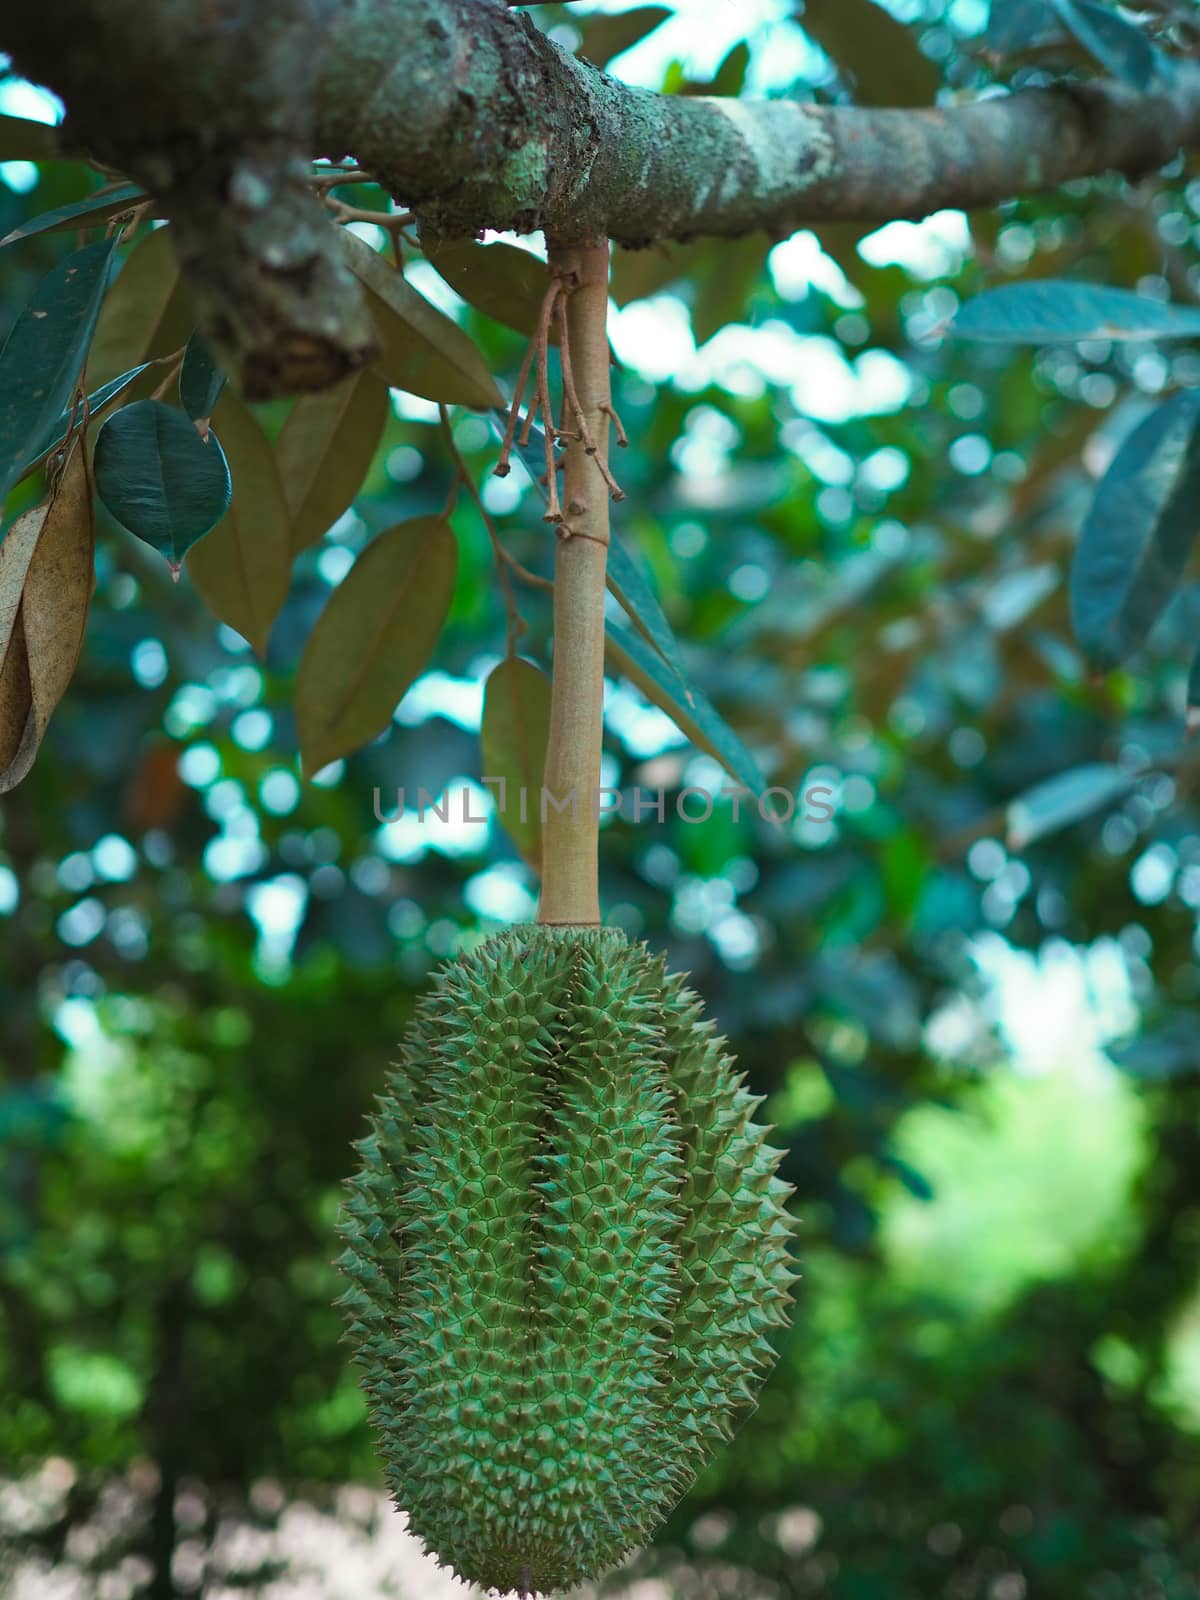 Durian is getting ripe, appetizing. by Unimages2527